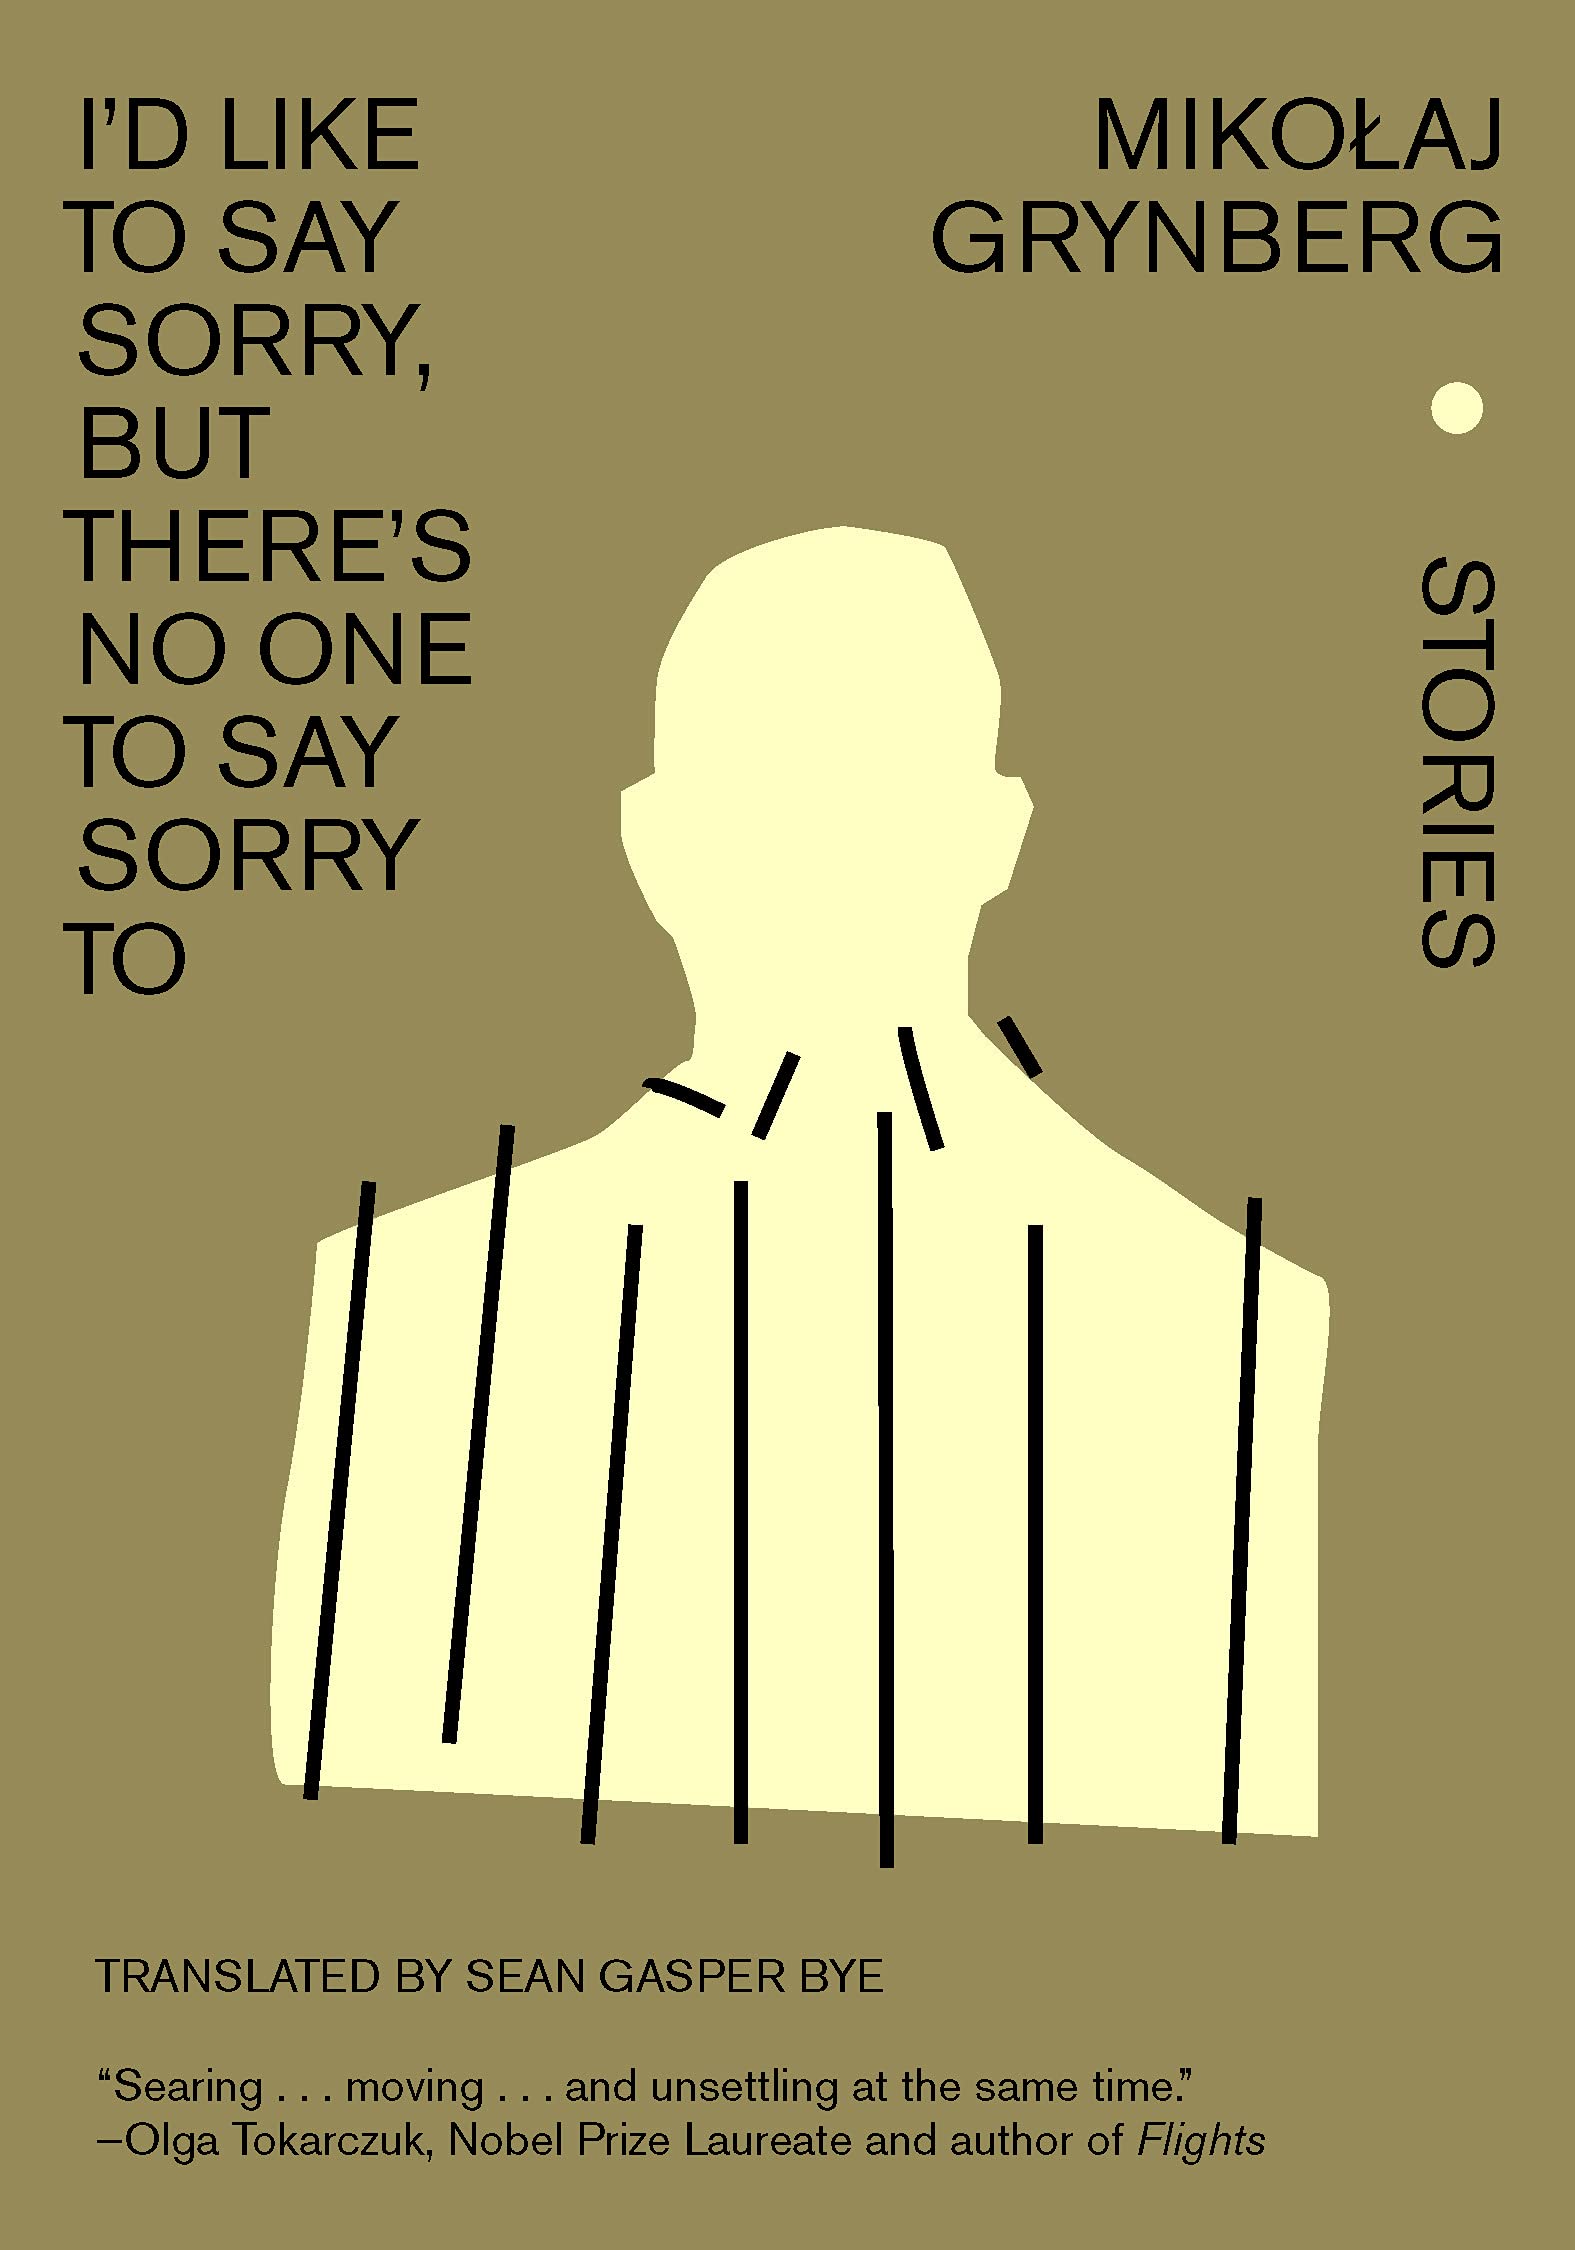 Book cover for "I'd Like to Say I'm Sorry, But There's No One to Say Sorry To" by Mikołaj Grynberg